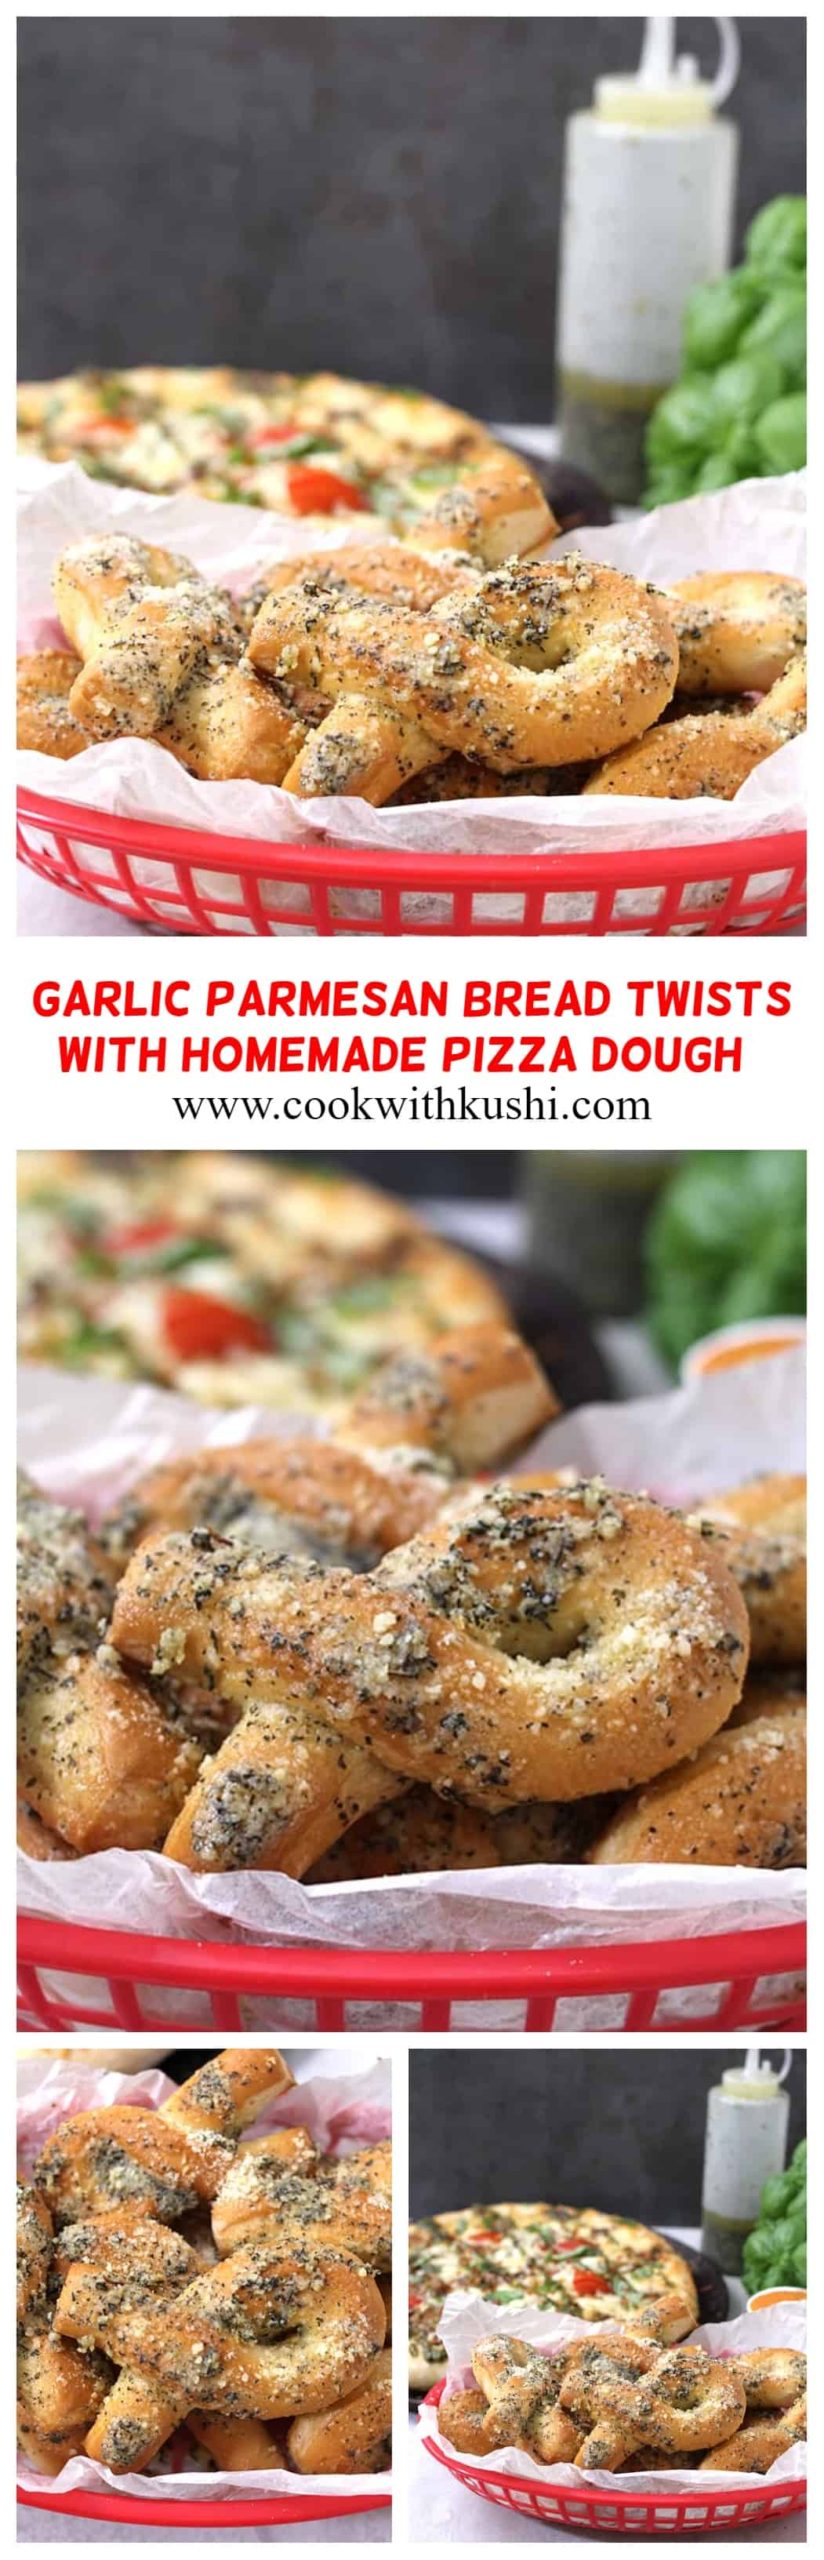 Garlic Parmesan Bread Twists or Garlic Knots are easy to make, buttery and melt in mouth, super soft and fluffy made using fresh homemade pizza dough from scratch which is then topped with flavorful garlic cheese herb butter. #garlicknots #garlicbread #breadsticks #easyrecipes #copycat #restaurantstyle #olivegarden #dominos #pizzahut #papajohns #appetizers #dinnersides #pastanight #Pizzaparty